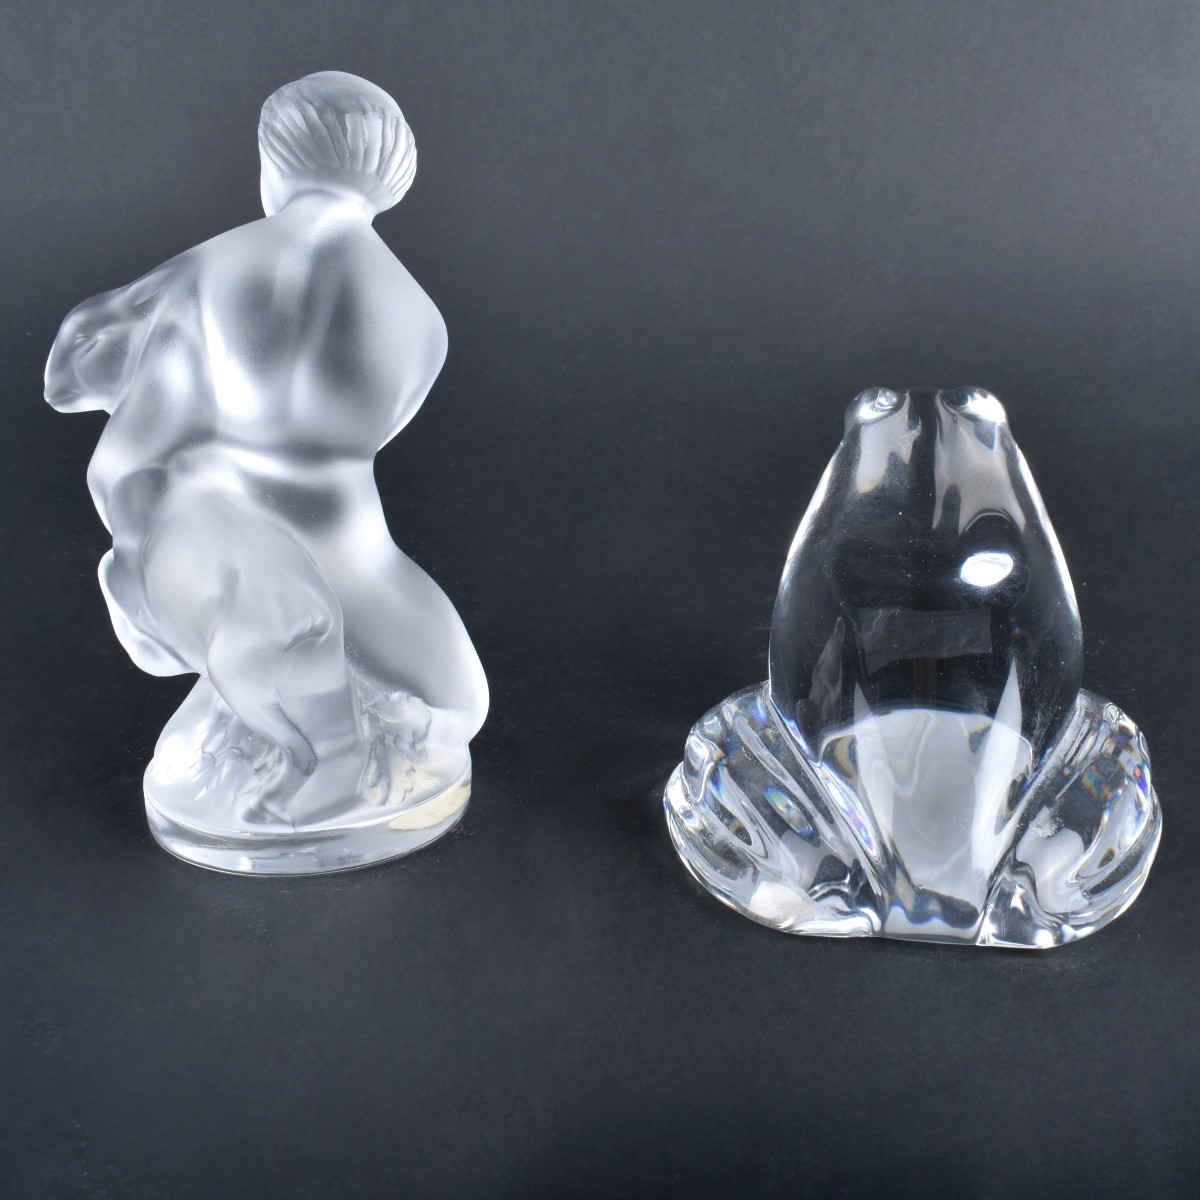 Lalique and Baccarat Figurines